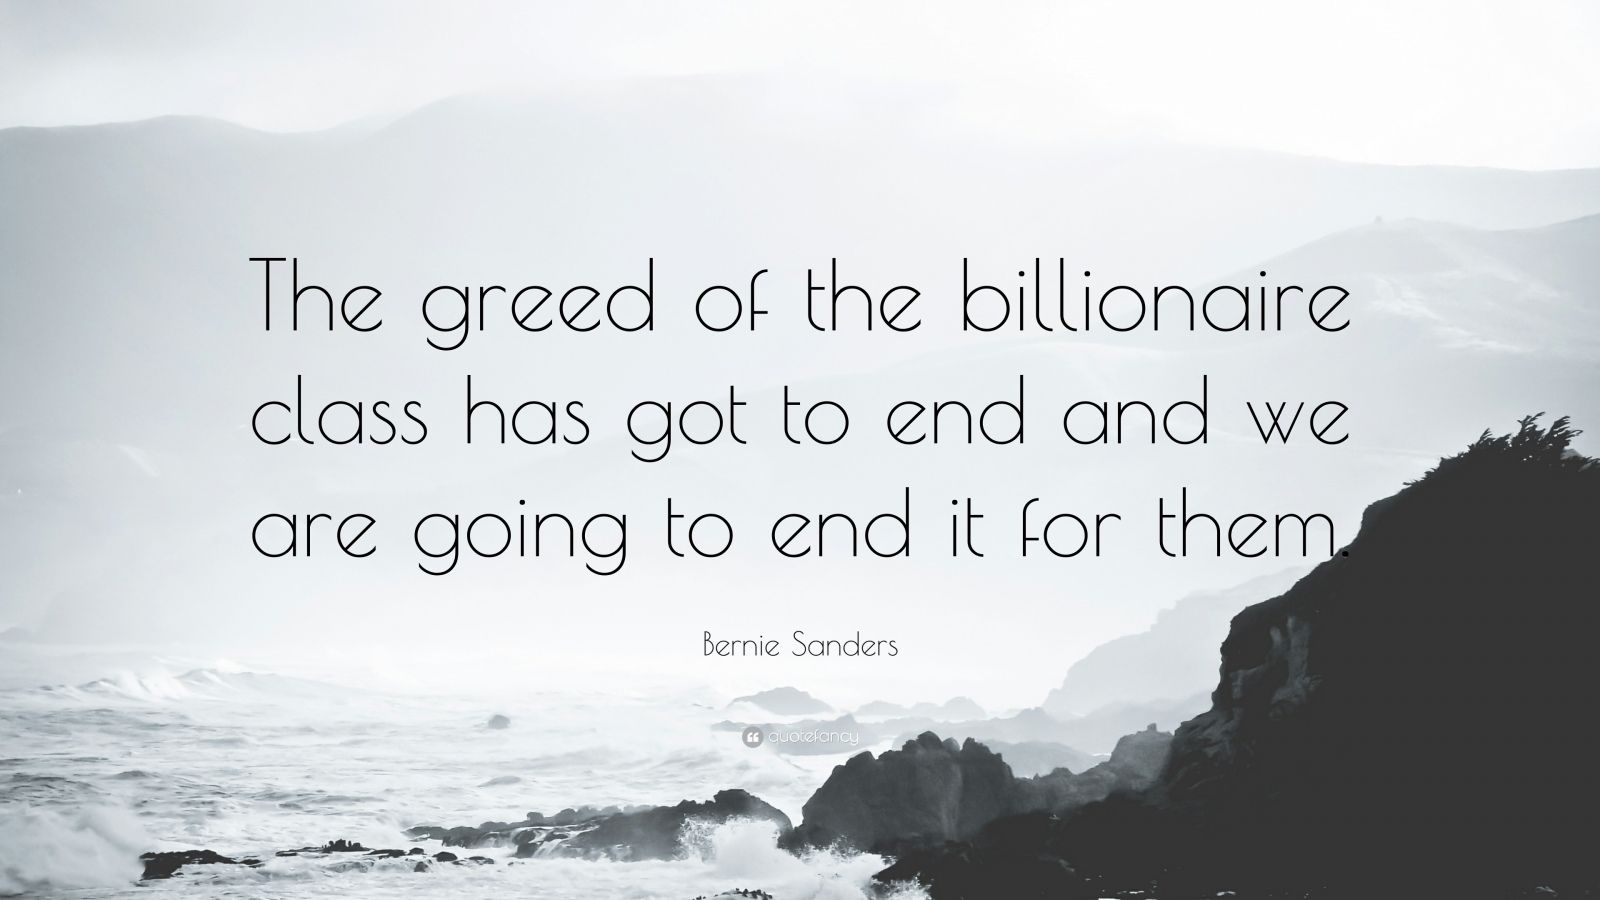 Bernie Sanders Quote “the Greed Of The Billionaire Class Has Got To End And We Are Going To End 6040